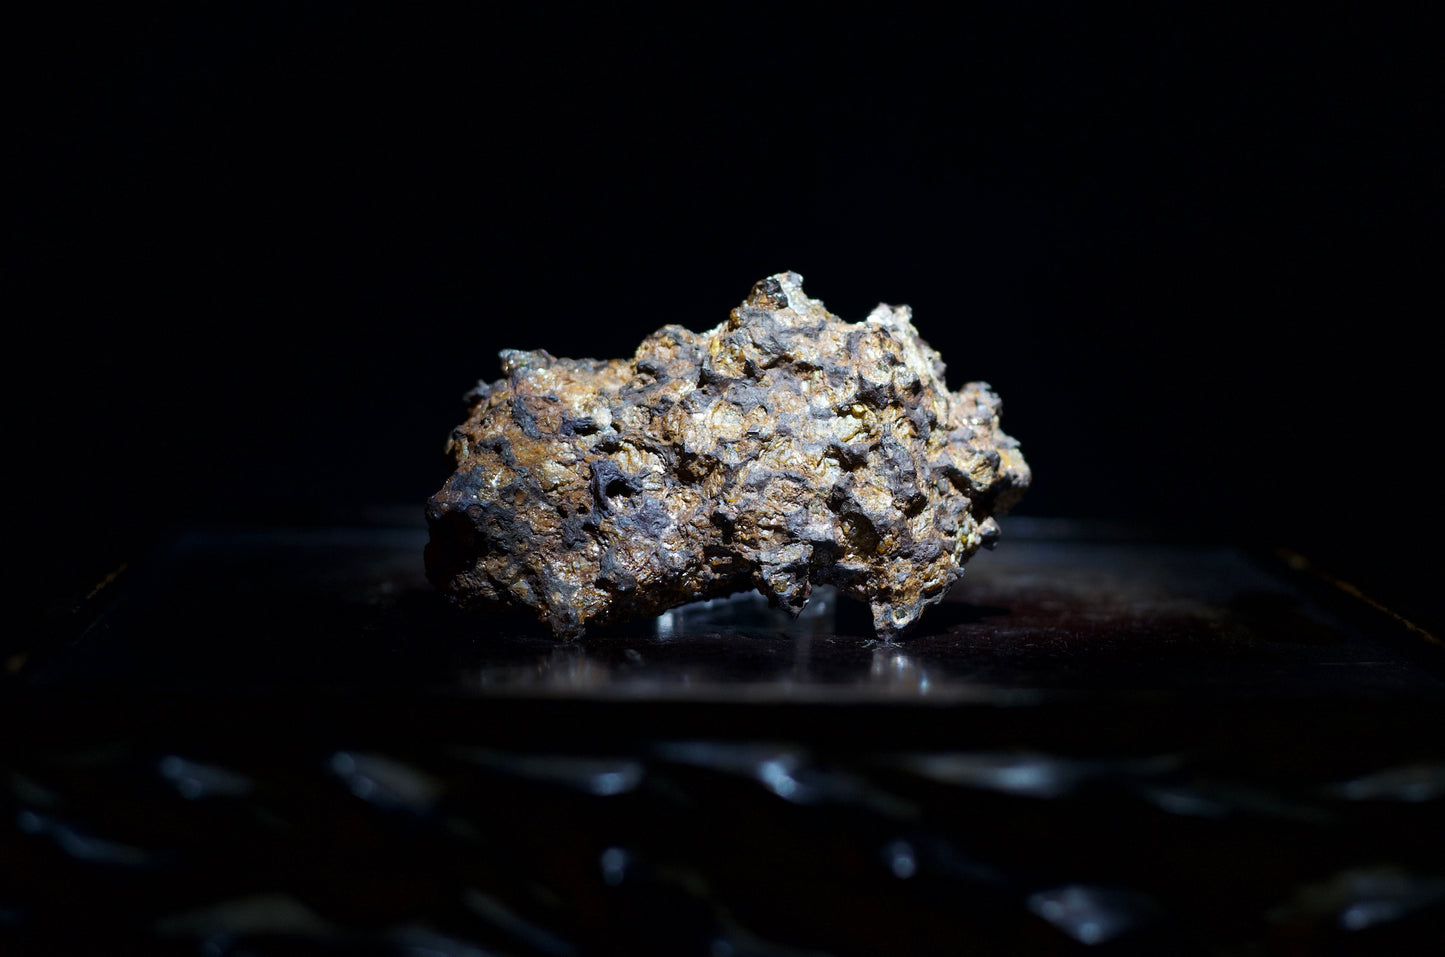 One-of-a-Kind 381.2g Pallasite Meteorite with Remnant Fusion Crust